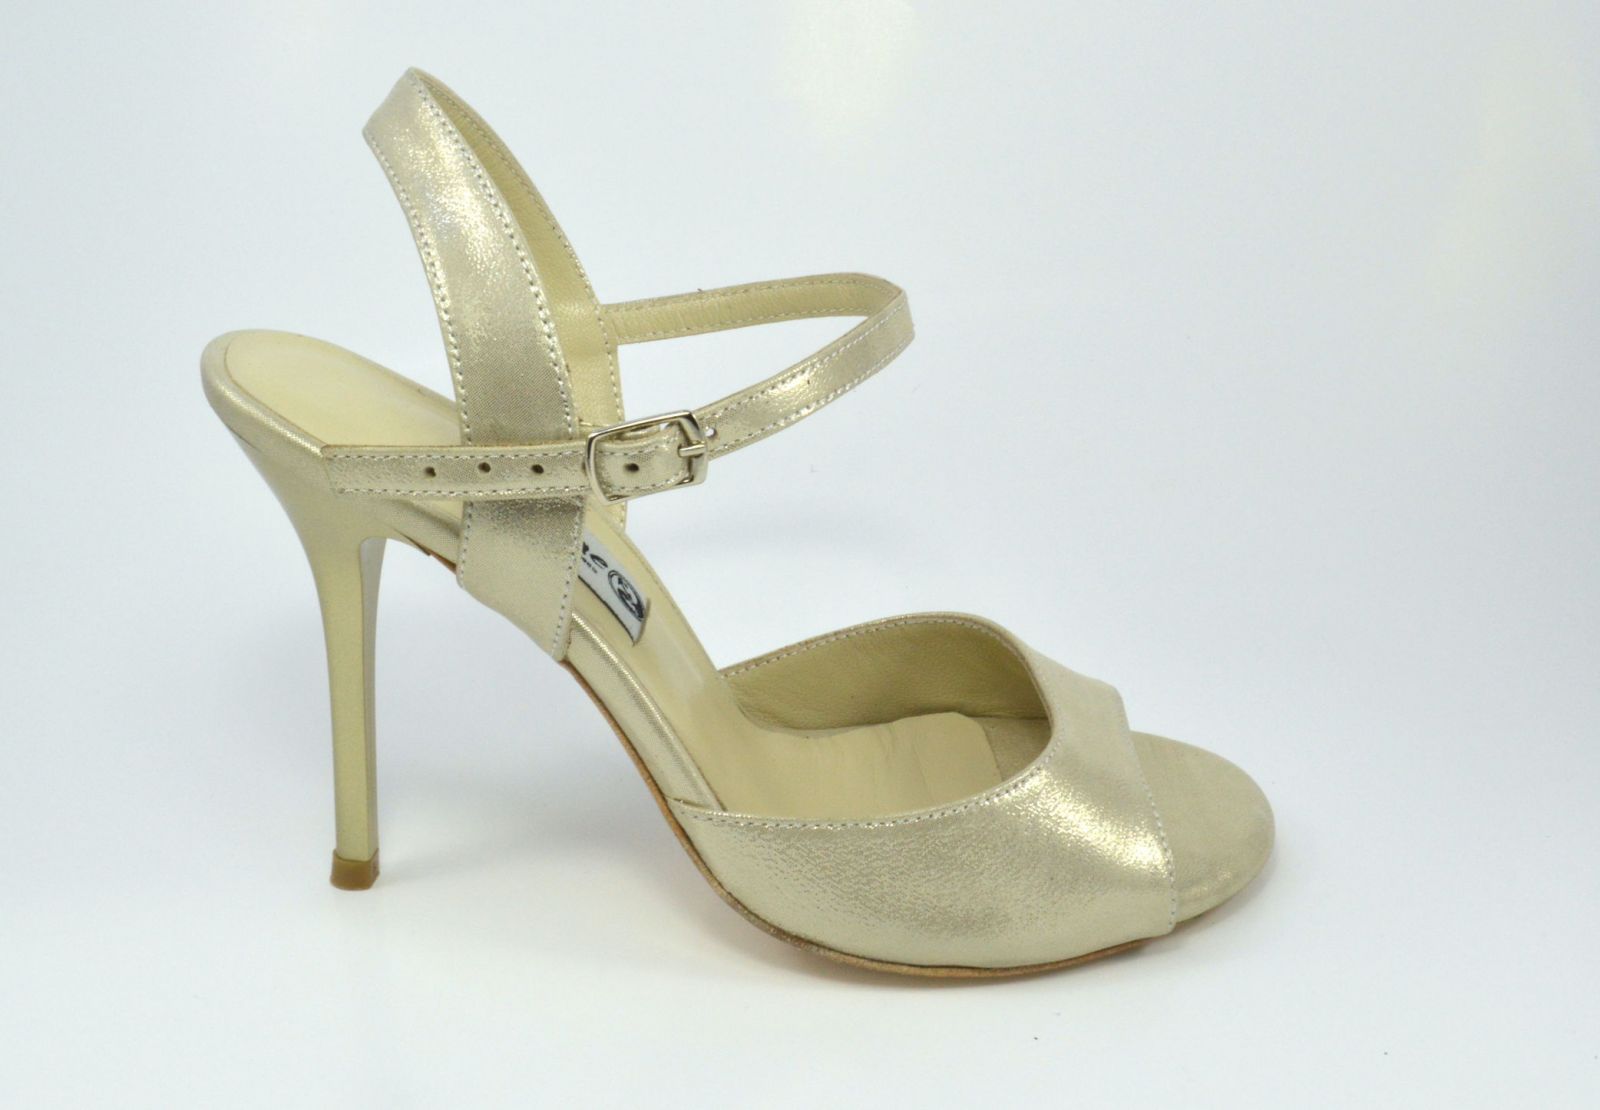 Women argentine tango dance shoes, in light gold-beige pearlised leather